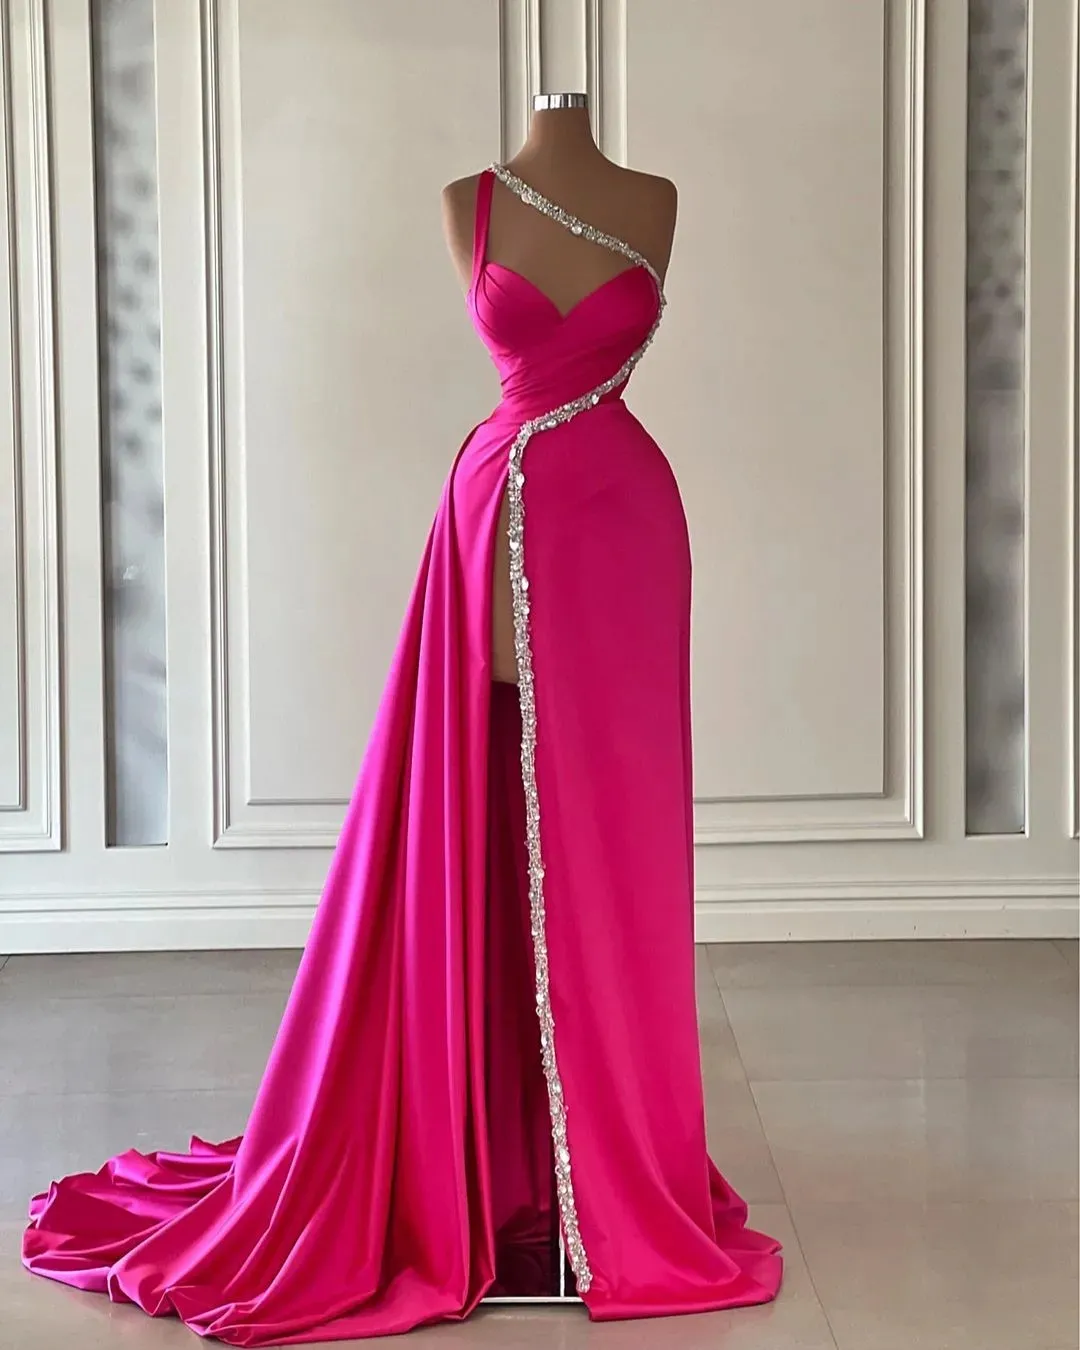 Elegant Fuchsia One Shoulder Prom Dresses Sparkly Rhinestones Sequined Ruched Satin Formal Occasion Party Gowns Sexy Thigh Split Evening Celebrity Dress CL2607